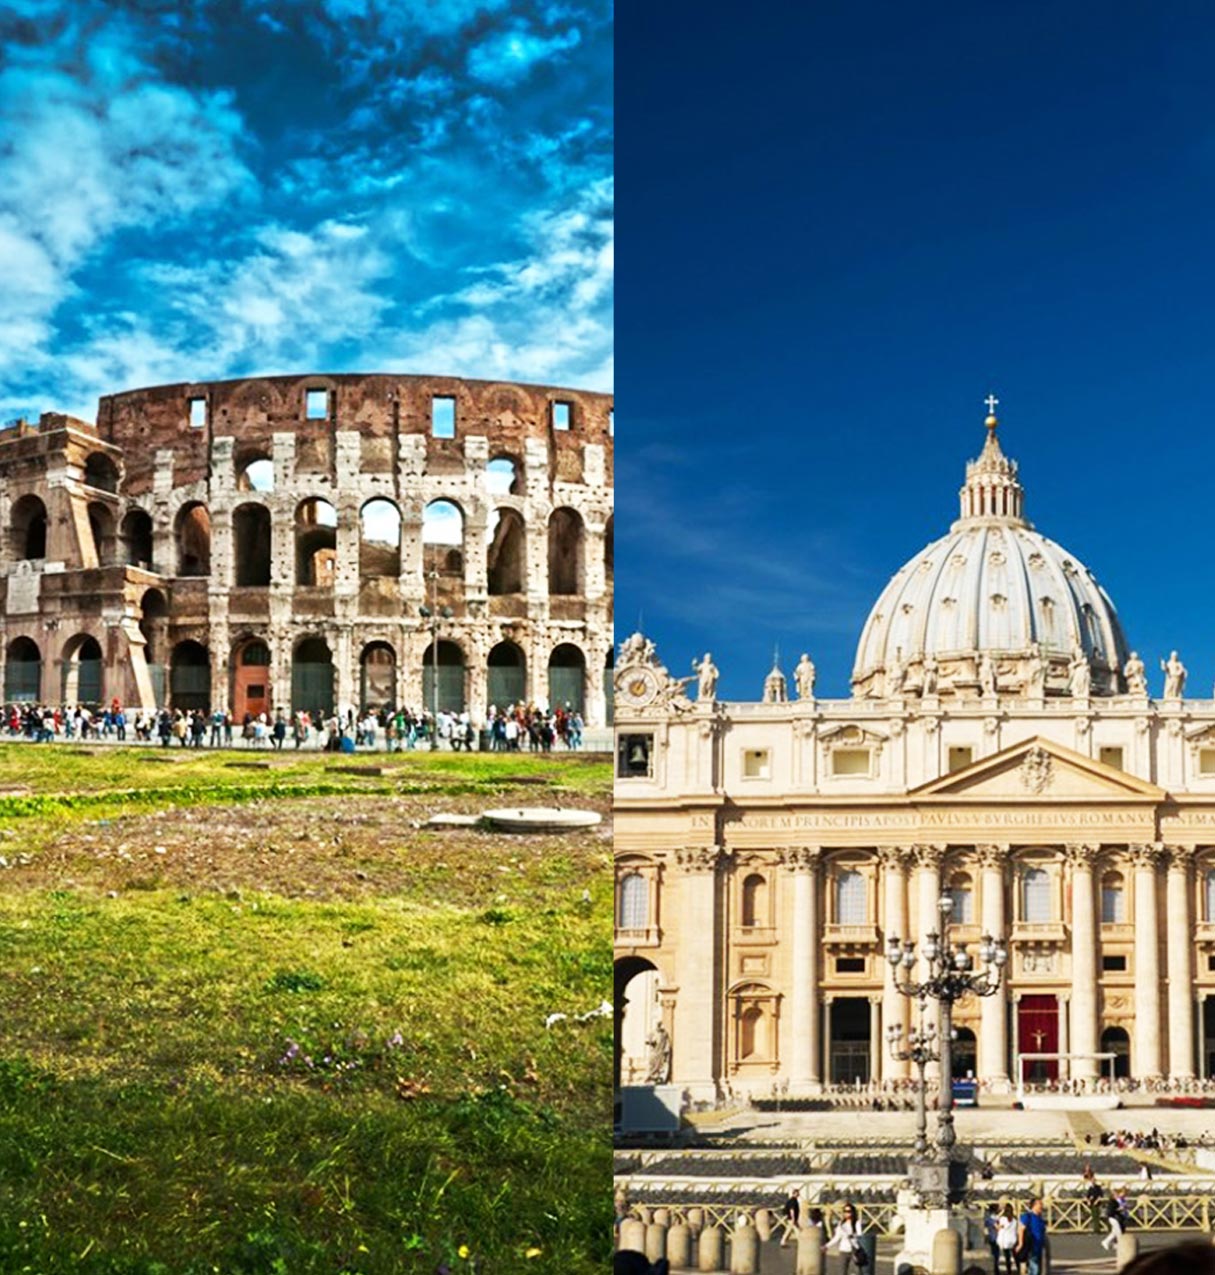 Combo (Save 5%): Colosseum + Vatican Museums Guided Tour